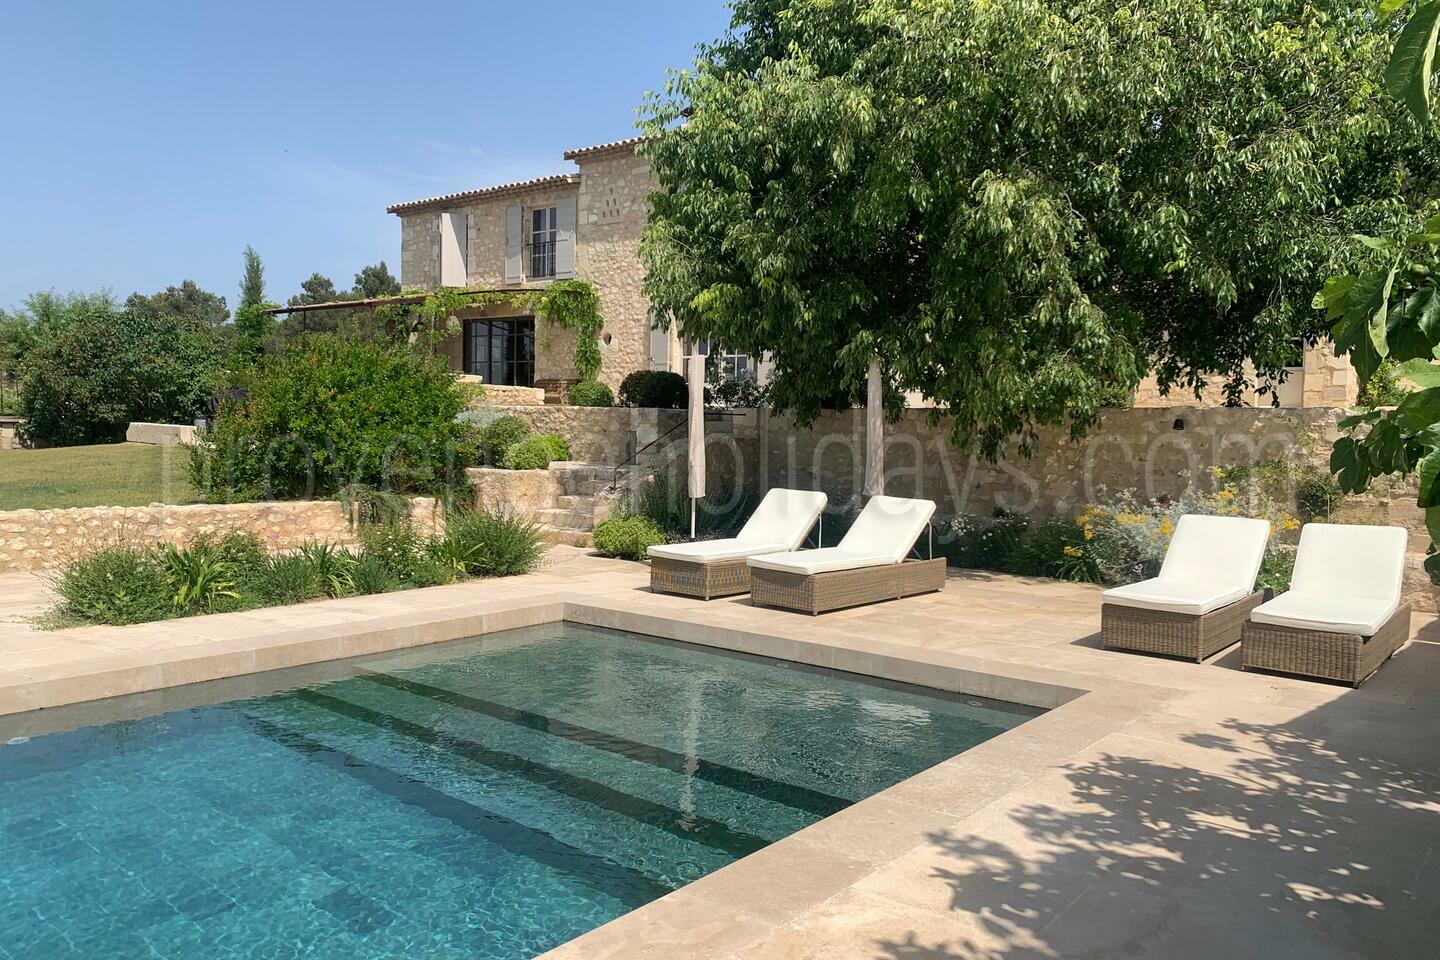 Fully-Renovated Farmhouse with Heated Pool and Jacuzzi -1 - Mas des Baux: Villa: Pool